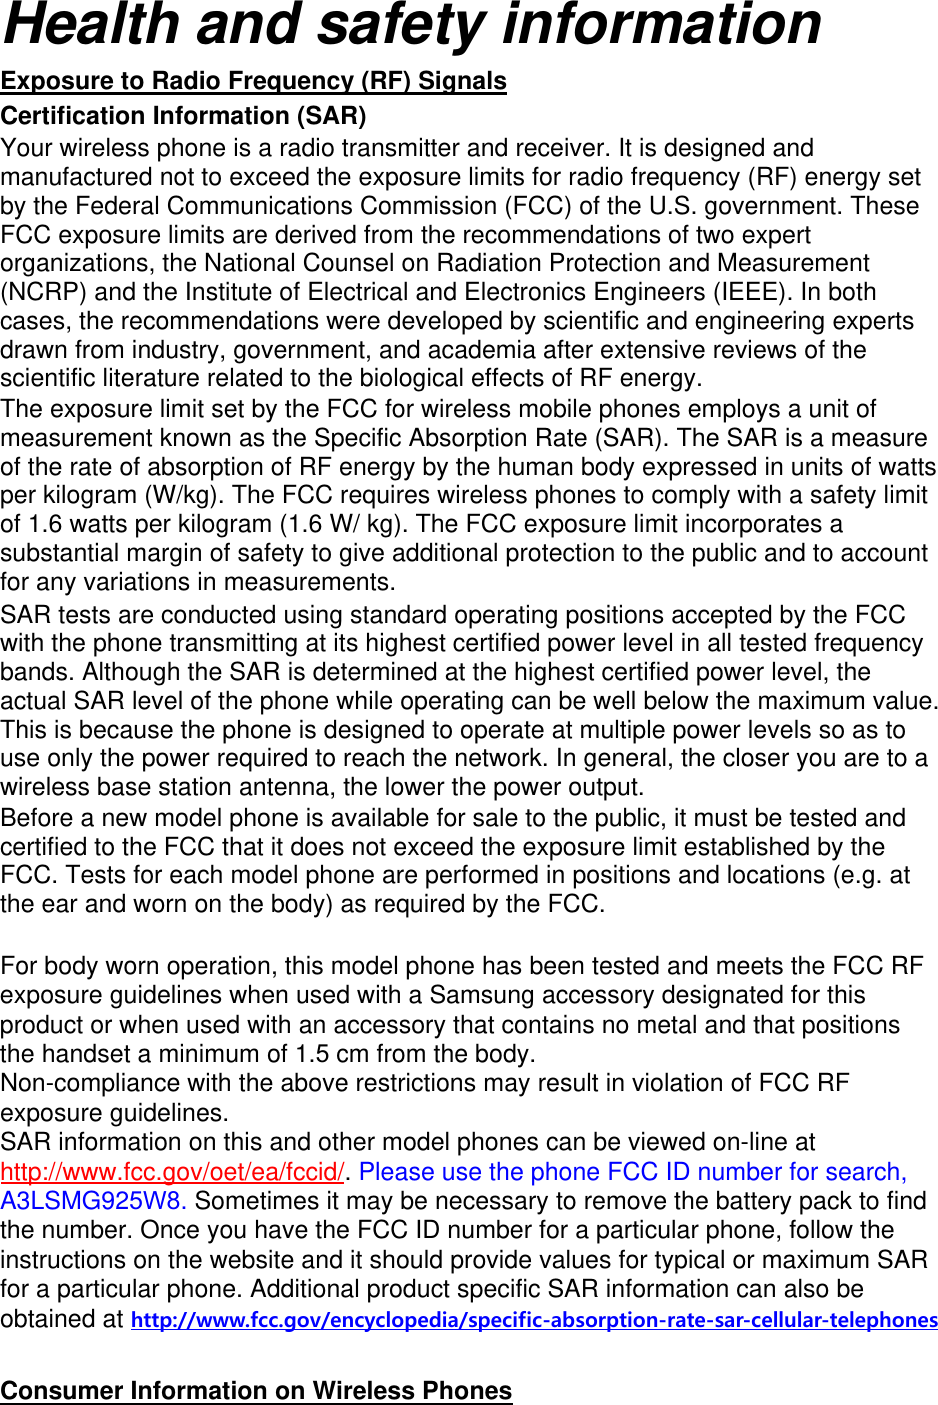 Health and safety information Exposure to Radio Frequency (RF) Signals Certification Information (SAR) Your wireless phone is a radio transmitter and receiver. It is designed and manufactured not to exceed the exposure limits for radio frequency (RF) energy set by the Federal Communications Commission (FCC) of the U.S. government. These FCC exposure limits are derived from the recommendations of two expert organizations, the National Counsel on Radiation Protection and Measurement (NCRP) and the Institute of Electrical and Electronics Engineers (IEEE). In both cases, the recommendations were developed by scientific and engineering experts drawn from industry, government, and academia after extensive reviews of the scientific literature related to the biological effects of RF energy. The exposure limit set by the FCC for wireless mobile phones employs a unit of measurement known as the Specific Absorption Rate (SAR). The SAR is a measure of the rate of absorption of RF energy by the human body expressed in units of watts per kilogram (W/kg). The FCC requires wireless phones to comply with a safety limit of 1.6 watts per kilogram (1.6 W/ kg). The FCC exposure limit incorporates a substantial margin of safety to give additional protection to the public and to account for any variations in measurements. SAR tests are conducted using standard operating positions accepted by the FCC with the phone transmitting at its highest certified power level in all tested frequency bands. Although the SAR is determined at the highest certified power level, the actual SAR level of the phone while operating can be well below the maximum value. This is because the phone is designed to operate at multiple power levels so as to use only the power required to reach the network. In general, the closer you are to a wireless base station antenna, the lower the power output. Before a new model phone is available for sale to the public, it must be tested and certified to the FCC that it does not exceed the exposure limit established by the FCC. Tests for each model phone are performed in positions and locations (e.g. at the ear and worn on the body) as required by the FCC.     For body worn operation, this model phone has been tested and meets the FCC RF exposure guidelines when used with a Samsung accessory designated for this product or when used with an accessory that contains no metal and that positions the handset a minimum of 1.5 cm from the body.  Non-compliance with the above restrictions may result in violation of FCC RF exposure guidelines. SAR information on this and other model phones can be viewed on-line at http://www.fcc.gov/oet/ea/fccid/. Please use the phone FCC ID number for search, A3LSMG925W8. Sometimes it may be necessary to remove the battery pack to find the number. Once you have the FCC ID number for a particular phone, follow the instructions on the website and it should provide values for typical or maximum SAR for a particular phone. Additional product specific SAR information can also be obtained at http://www.fcc.gov/encyclopedia/specific-absorption-rate-sar-cellular-telephonesConsumer Information on Wireless Phones 